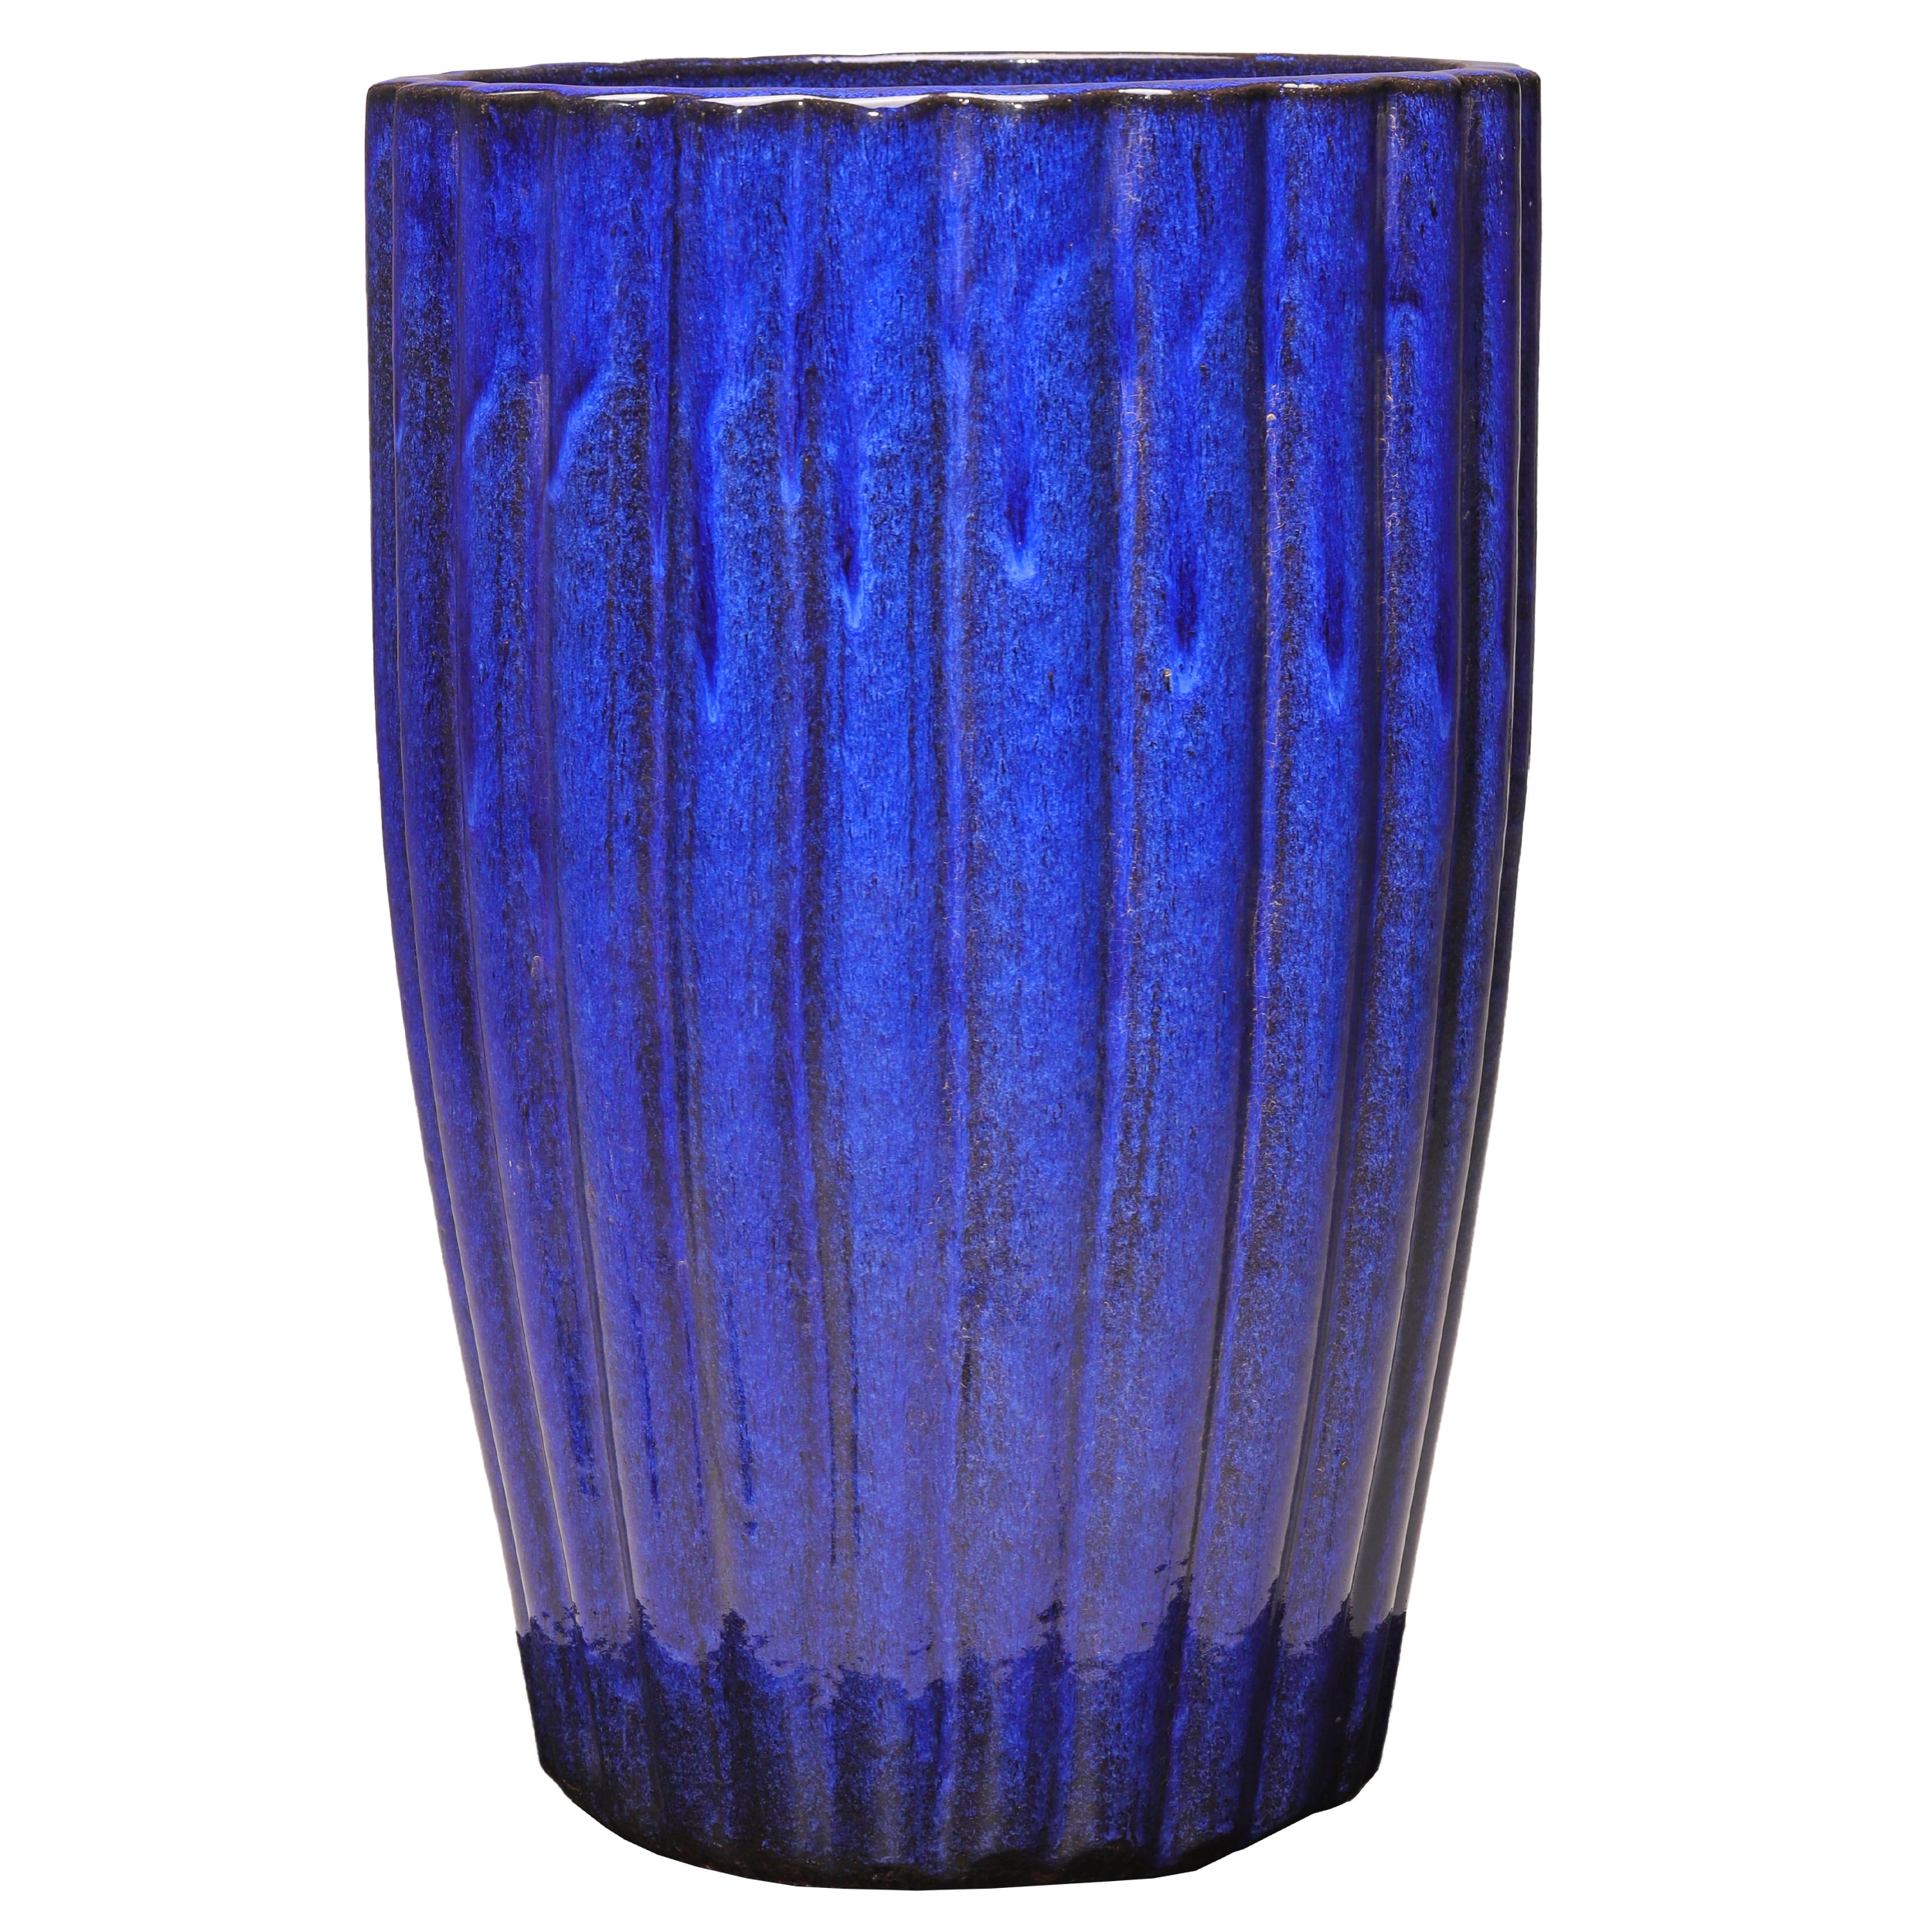 Ambassadeur Gek wakker worden allen + roth 14.96-in x 22.83-in Blue Ceramic Planter with Drainage Holes  in the Pots & Planters department at Lowes.com